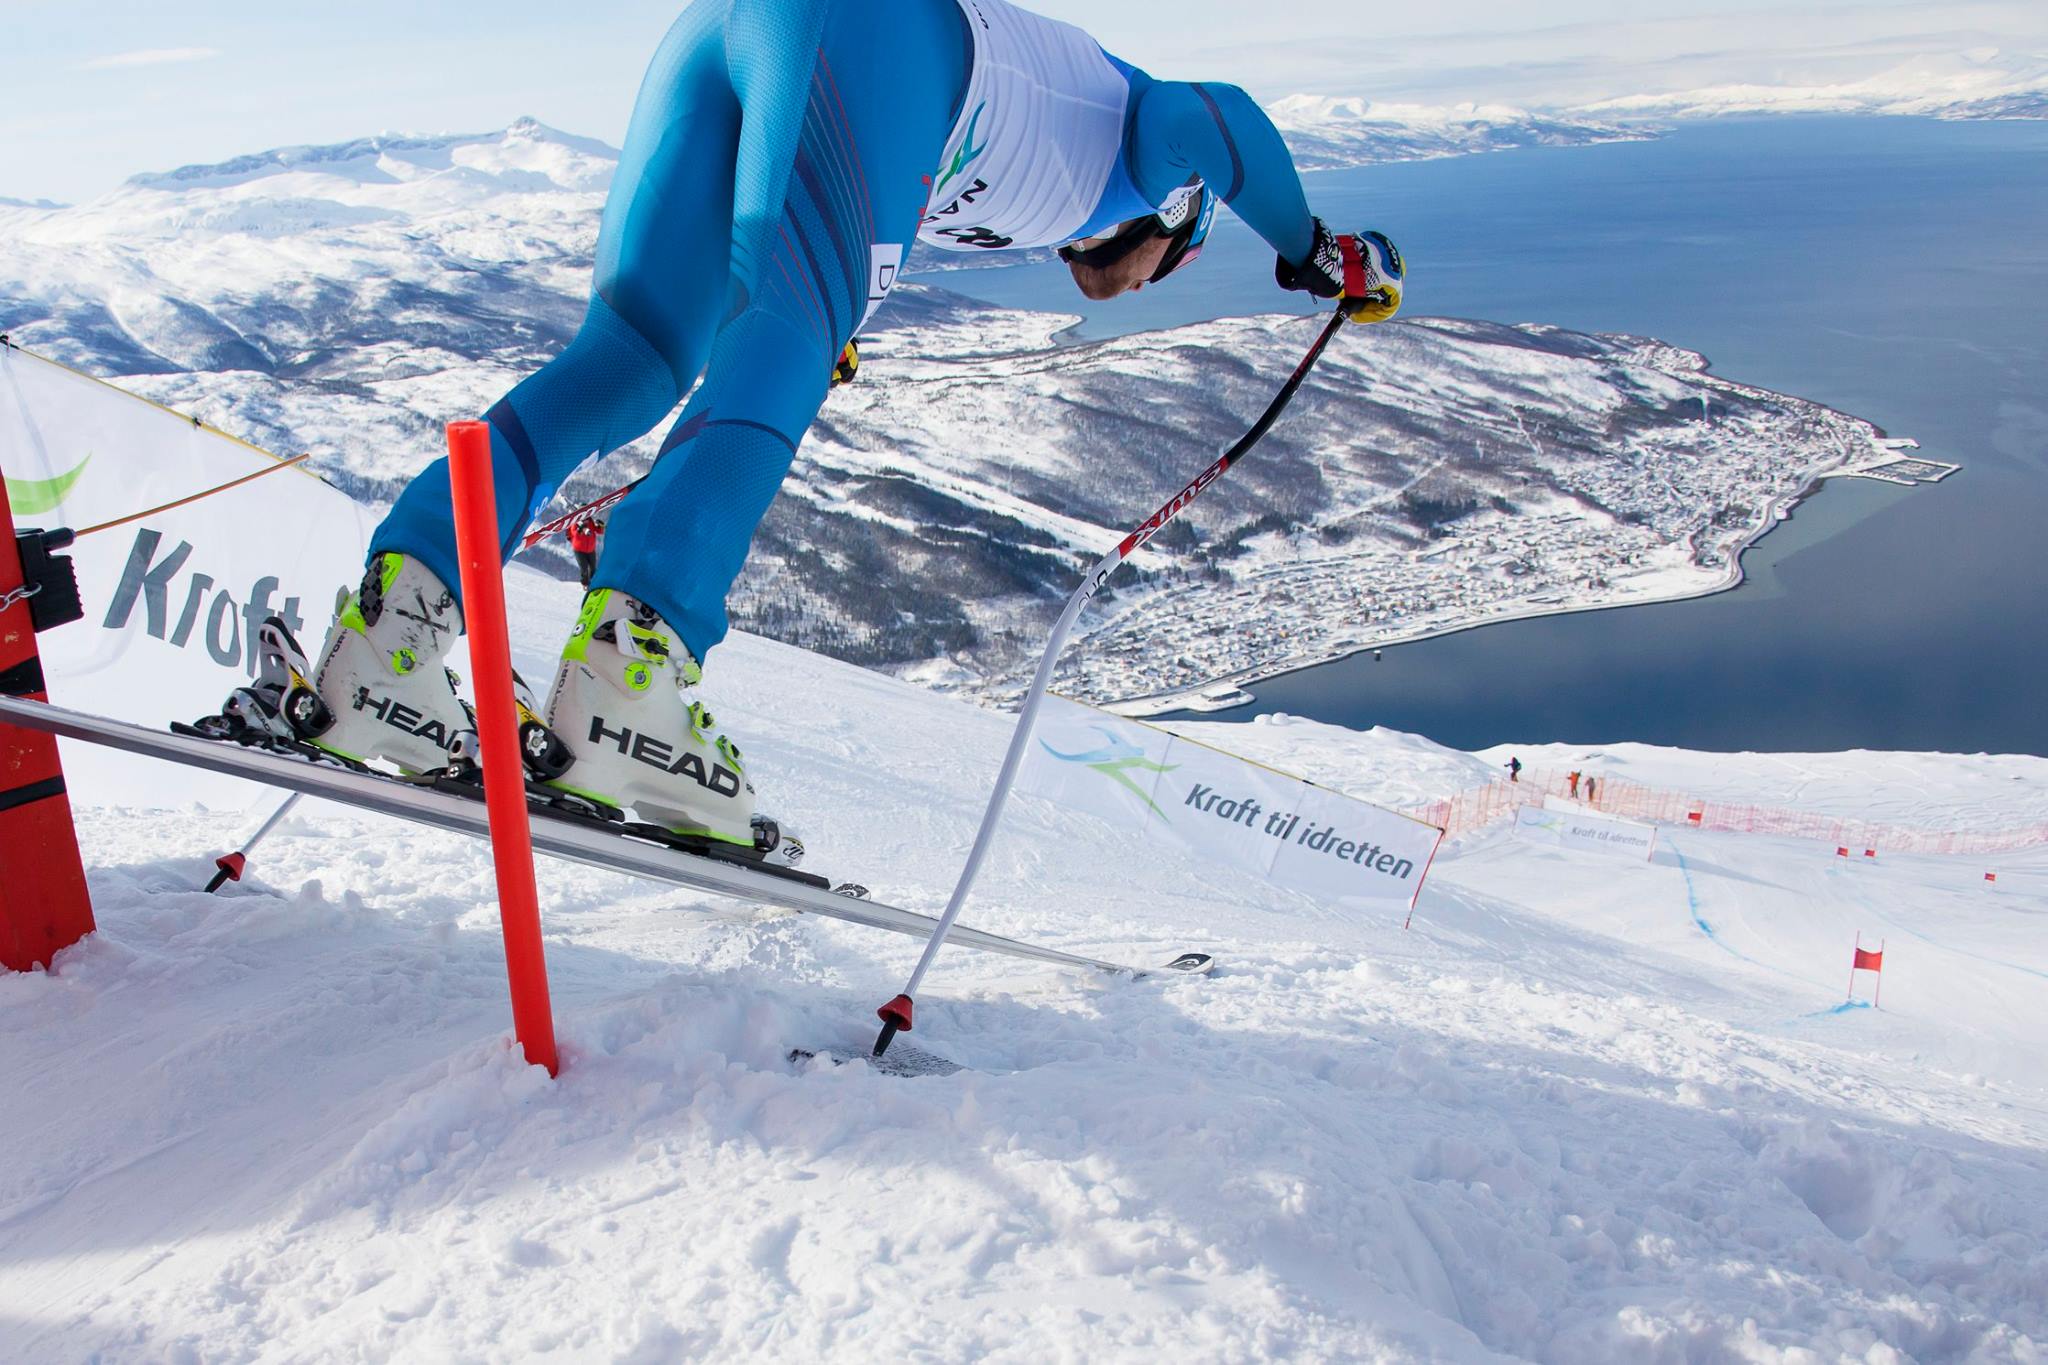 ski racer sets out of gates on a course above a fjord in what can only be Norway